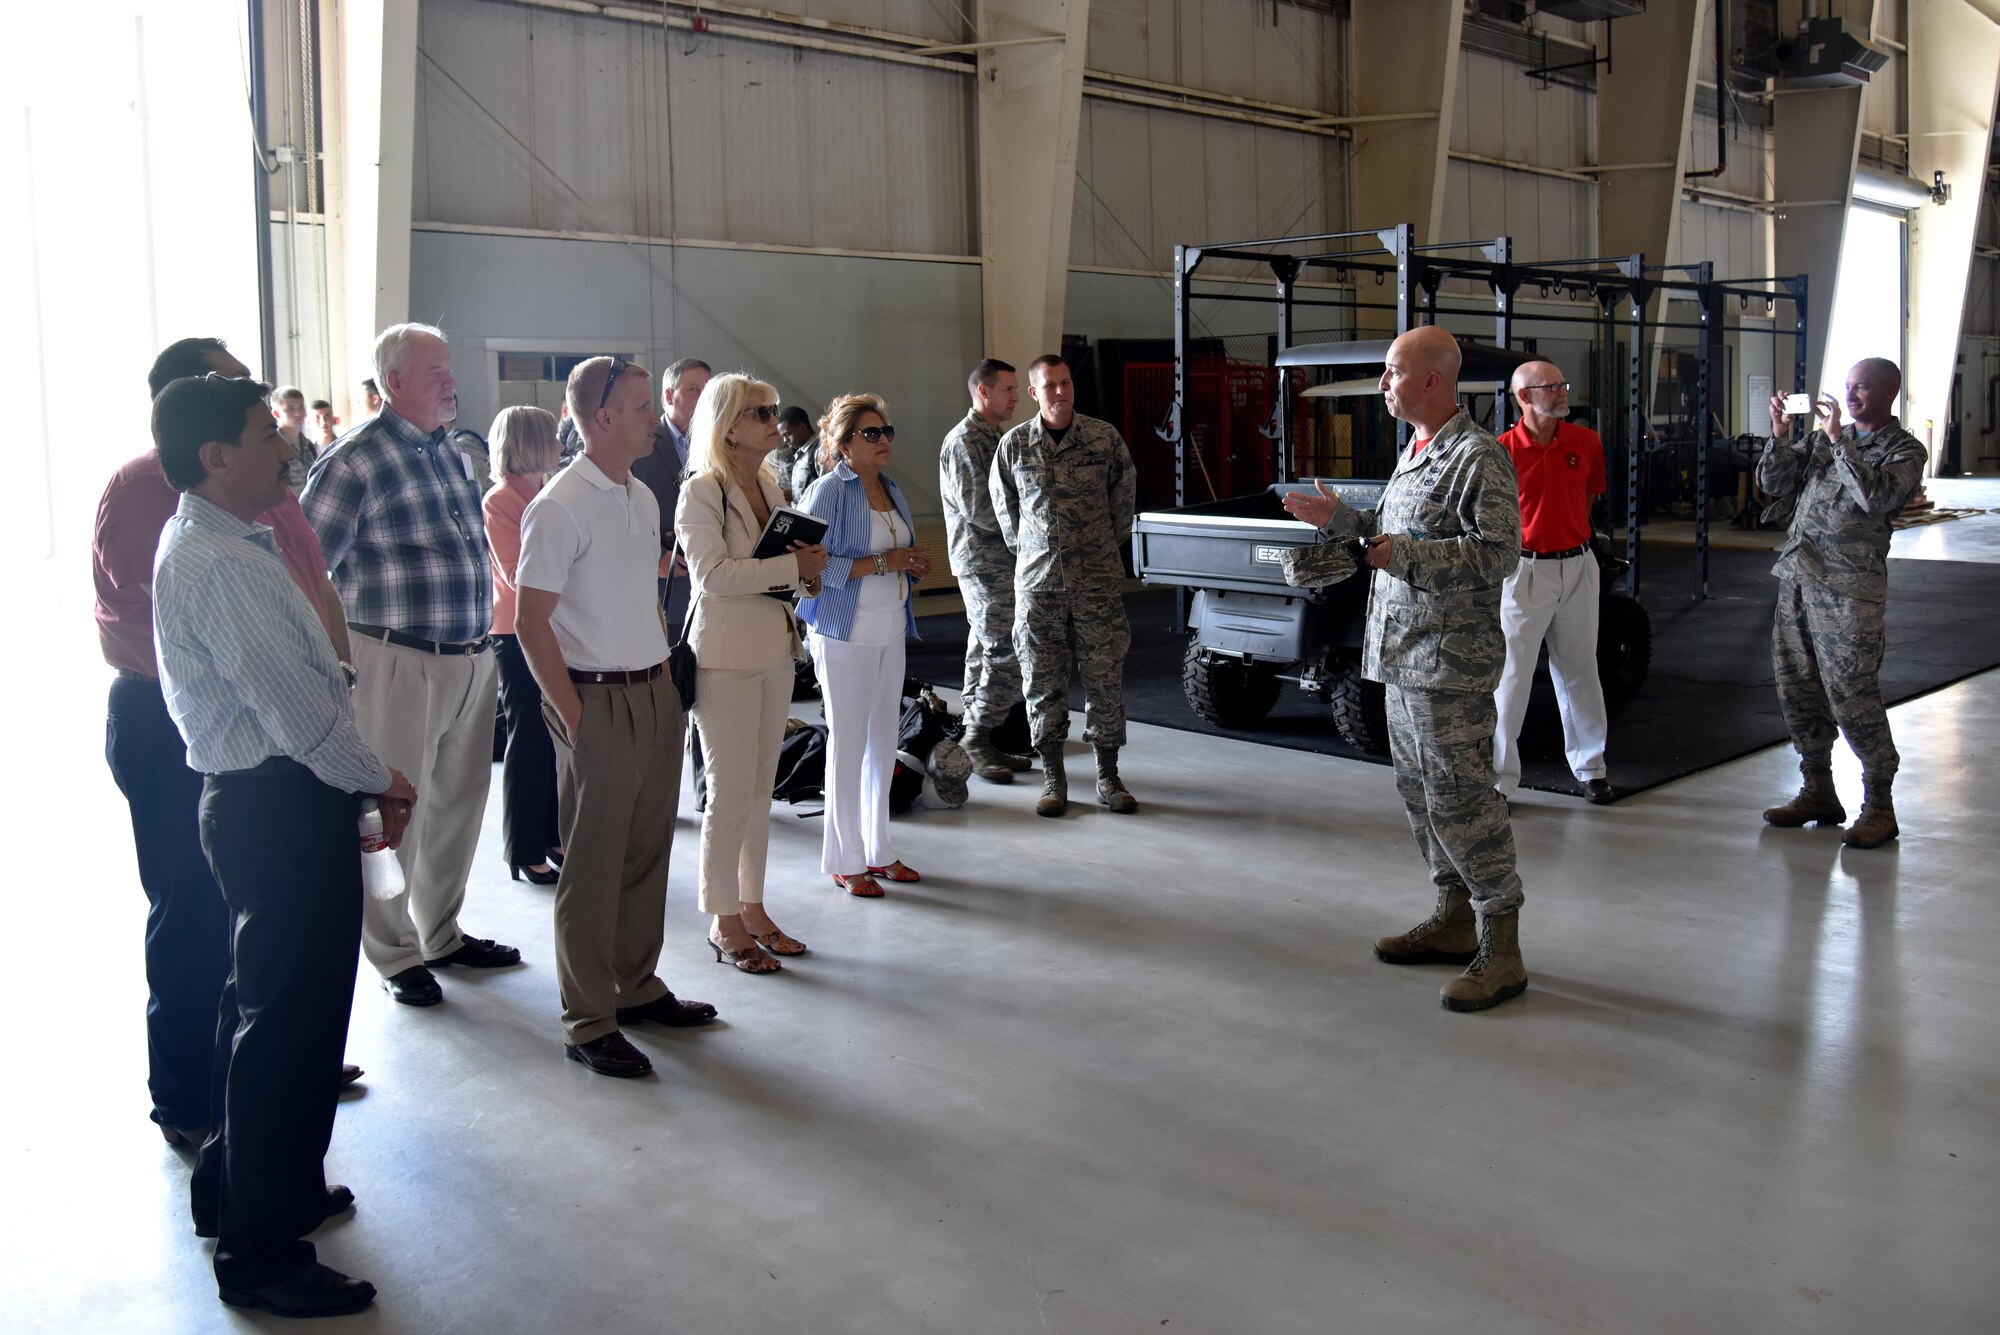 U.S. Air Force Lt. Col. Matthew Welling, 312th Training Squadron Commander, begins a tour for community leaders at the Louis F. Garland Department of Defense Fire Academy on Goodfellow Air Force Base, Texas, July 7, 2017. The fire academy tour was part of a larger tour designed to orient new San Angelo, Texas leaders. (U.S. Air Force photo by Staff Sgt. Joshua Edwards/Released)